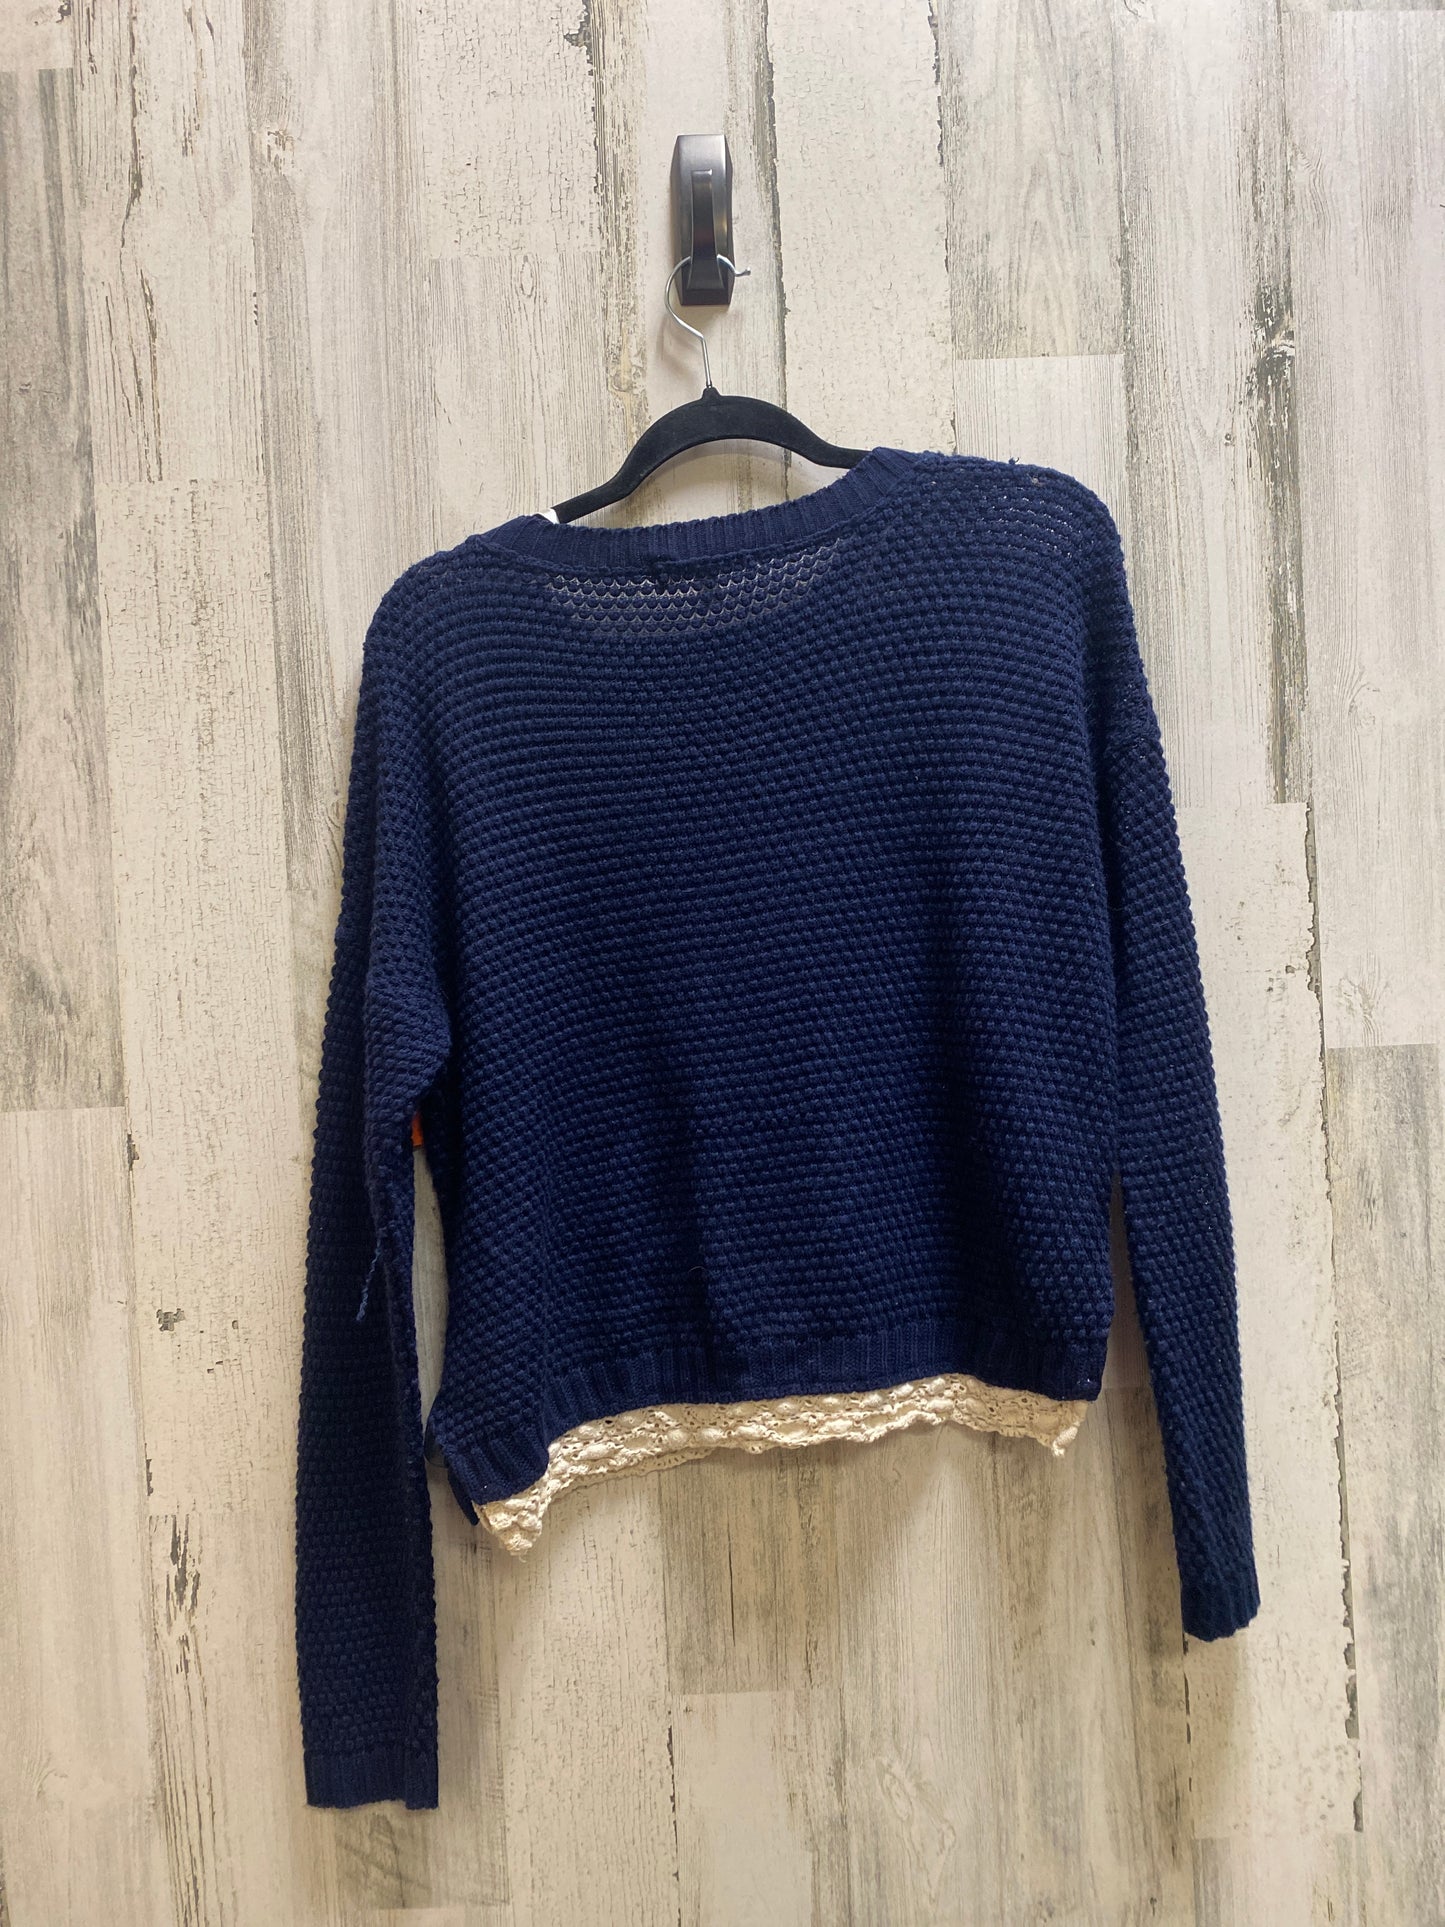 Sweater By Say What  Size: L